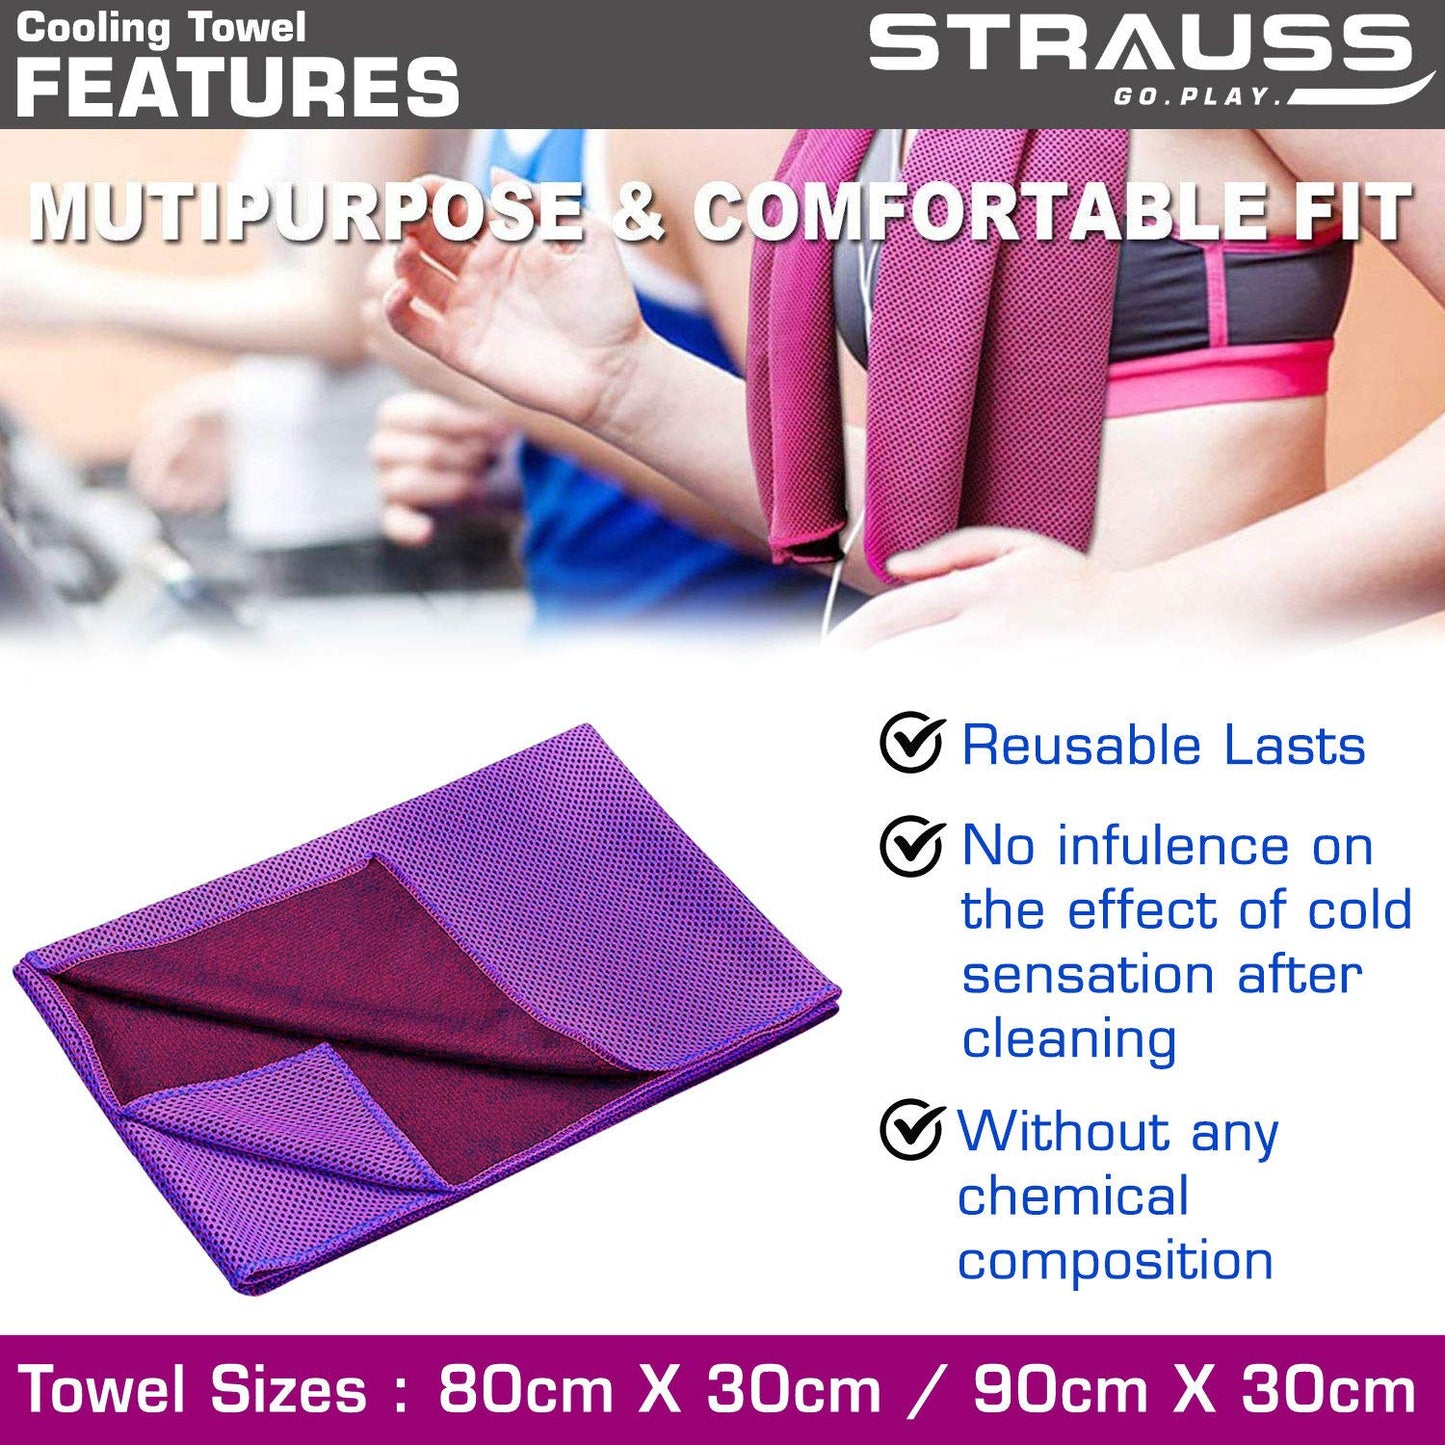 Cool Towel-Swing Unisex Polyester Polyamide Microfiber Cooling Towel Instantly